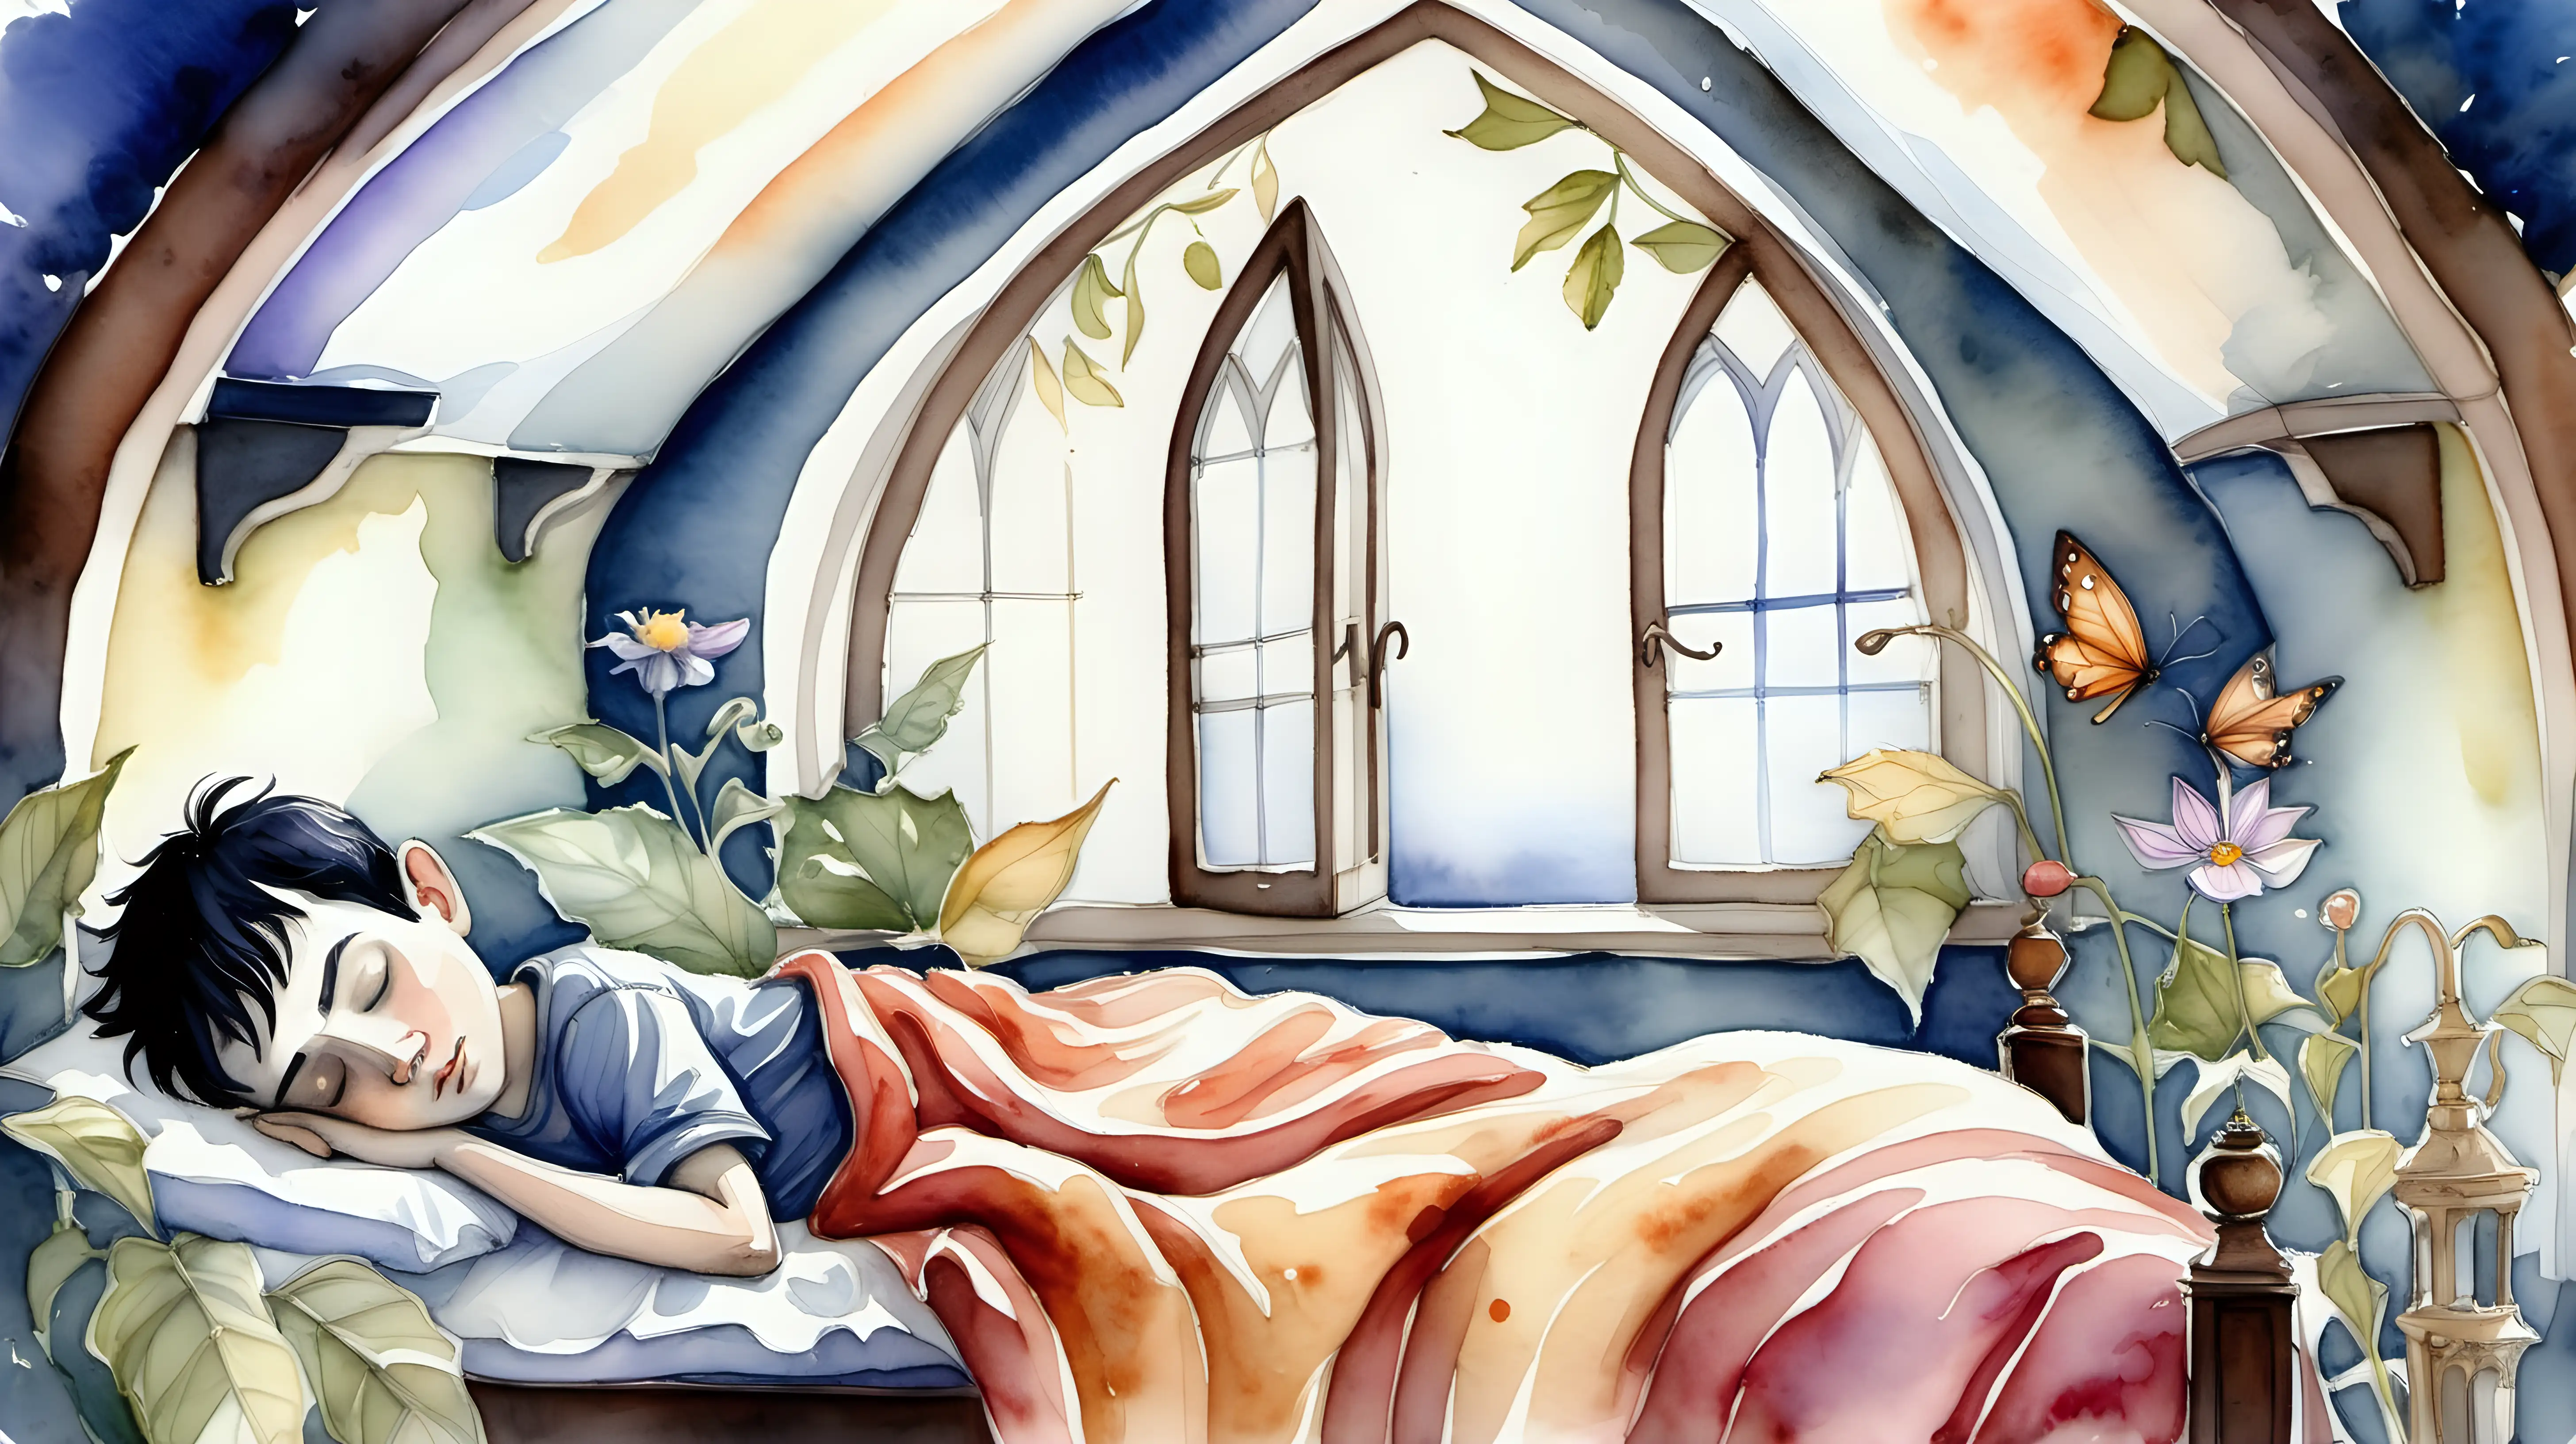 Watercolour fairy story painting. Inside a beautiful fairytale house a blackhaired young male pixie is asleep in bed. 